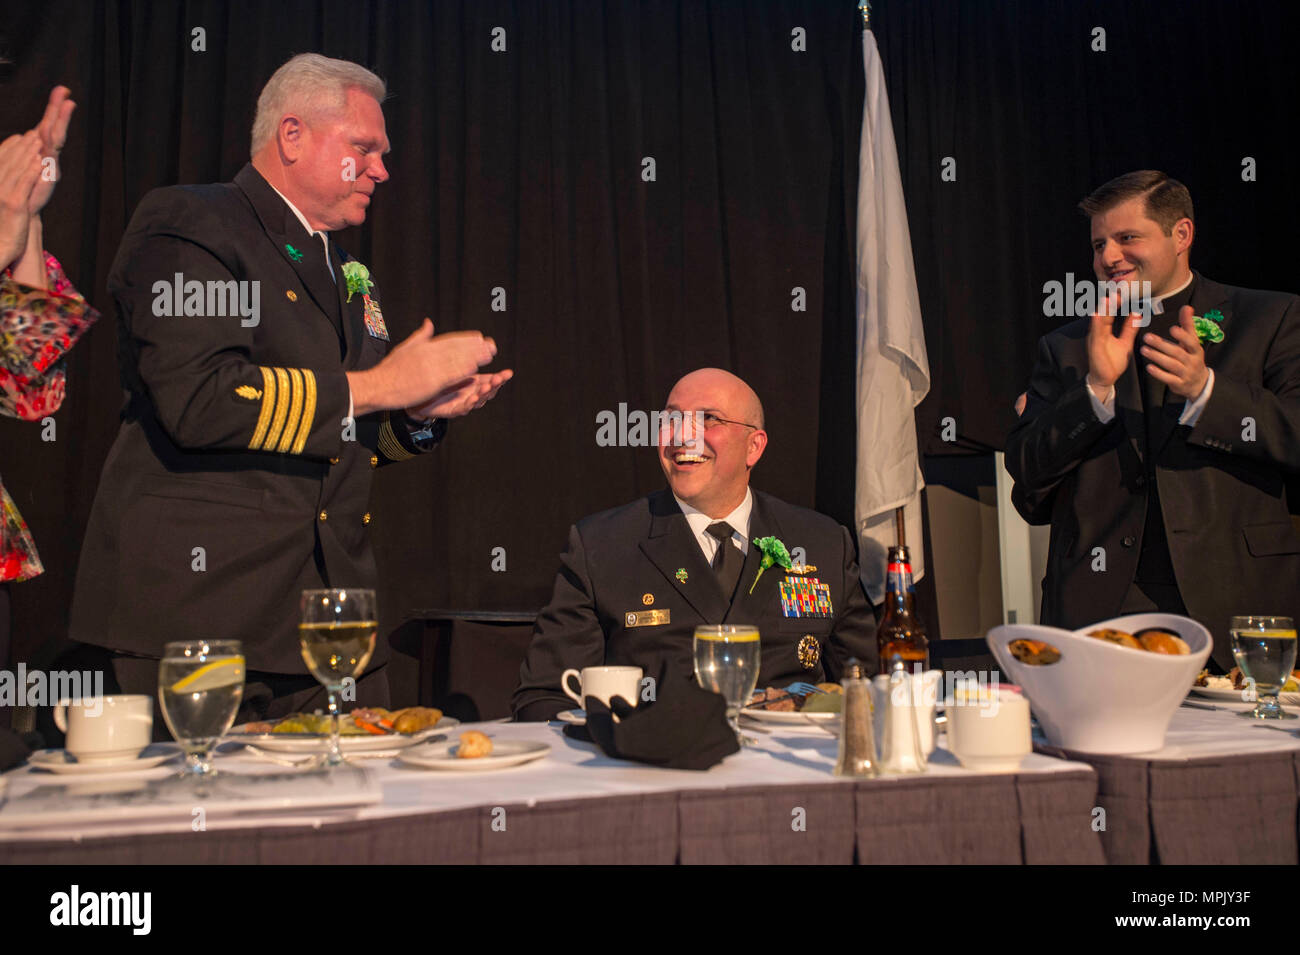 170317-N-WS581- 276    BOSTON (March 17, 2017) The guide-missile cruiser USS San Jacinto (CG 56) Commanding Officer Capt. Dennis Valuez gives a speech at the South Boston Citizen’s Association Evacuation Day Banquet. USS San Jacinto (CG 56) participates in Boston's, St. Patrick’s Day festivities and community programs throughout the city. (U.S. Navy photo by Mass Communication Specialist 2nd class Andrew J. Sneeringer) Stock Photo